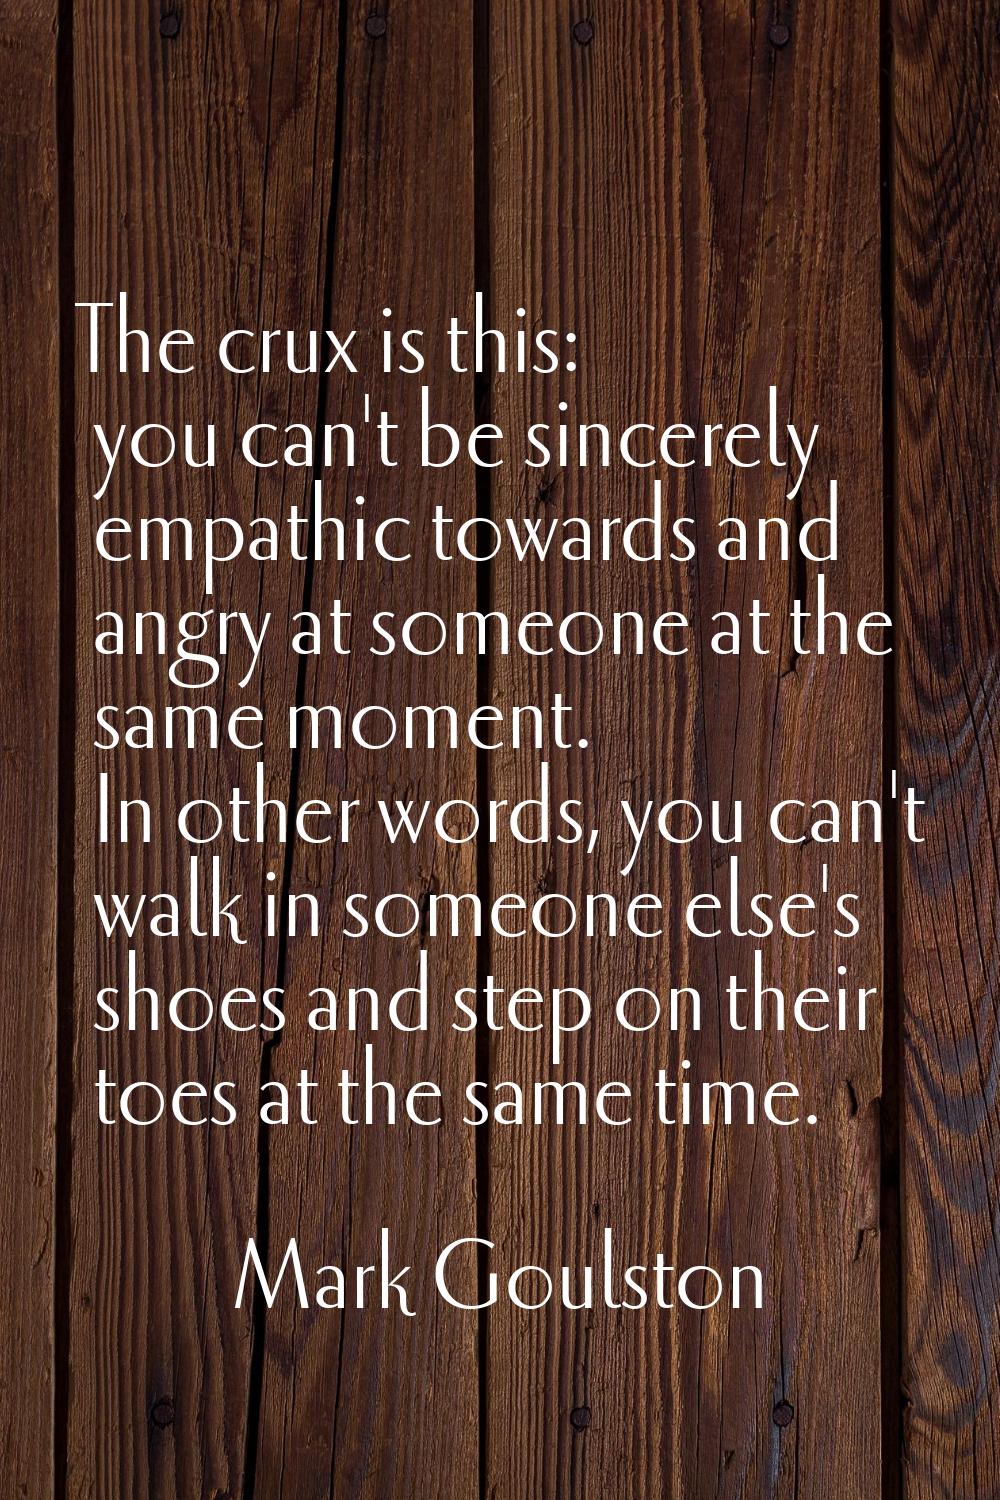 The crux is this: you can't be sincerely empathic towards and angry at someone at the same moment. 